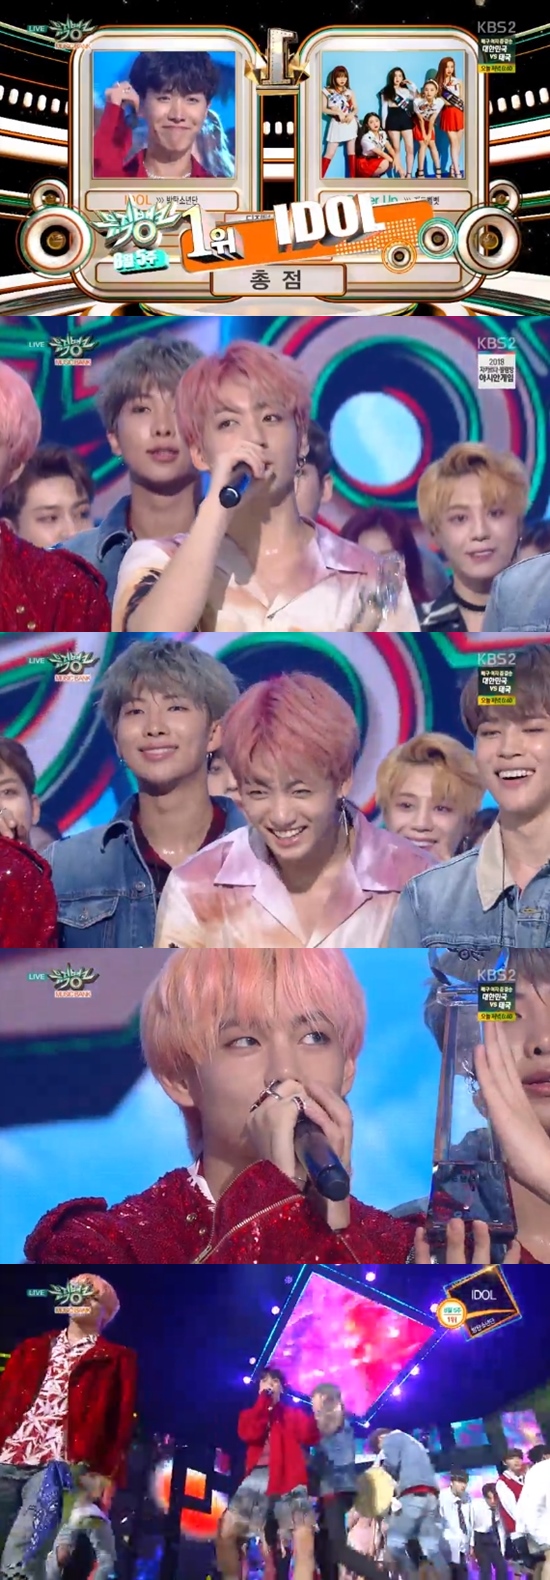 BTS came in first at the same time as the comeback.On KBS 2TV Music Bank broadcast on the 31st, BTS Idol beat Red Velvets Power Up and took first place at the same time as the comeback, and announced the Idol craze.Were getting the prize in the first week of the comeback, not just our own, but the prize youve created, BTS said.Thank you for this award, Ami, I think you are the only one, said Bu.As mentioned earlier, BTS took the Samulnori instrument and took the stage to celebrate the first place with a wind.On this day, there was a comeback stage of Shinhwa, which celebrated its 20th anniversary.Shinhwa announced the return of the legend by showing off the charisma of a different history with KISS ME LIKE THAT and Do not leave.The title song Kiss My Rike That is a dance song led by acoustic guitar. It is an addictive chorus that catches the ear. Shinhwa has an attractive voice and sensual performance.The group BTS, which rocked the world, also made a comeback: The Bulletproof Boys, who released two new songs, Idol (IDOL) and Im Fine, took control of the stage with the charisma of bulletproof.Especially, Idol is a combination of Korean traditional music and Chuimsae in South Afrikaan beat, and completed sophisticated music that only BTS can show.The soft-toned Raina gave a faint sensibility by making a comeback with Small in the middle, and NCT DREAM gave a powerful energy by releasing the first two stages of We Go Up and 1, 2, 3.In addition, (girl) children, IN2IT, MXM, SF9, Stray Kids, Go Sung-min, Kim Yong-guk, Nature (NATURE), Norazo, LaBoom (LABOUM), Lime Soda, Rossi, Berrygut, Big Flo, Hot-blooded Nama (Tajihyuk), Impact appeared and set up various stages.Photo = KBS 2TV broadcast screen